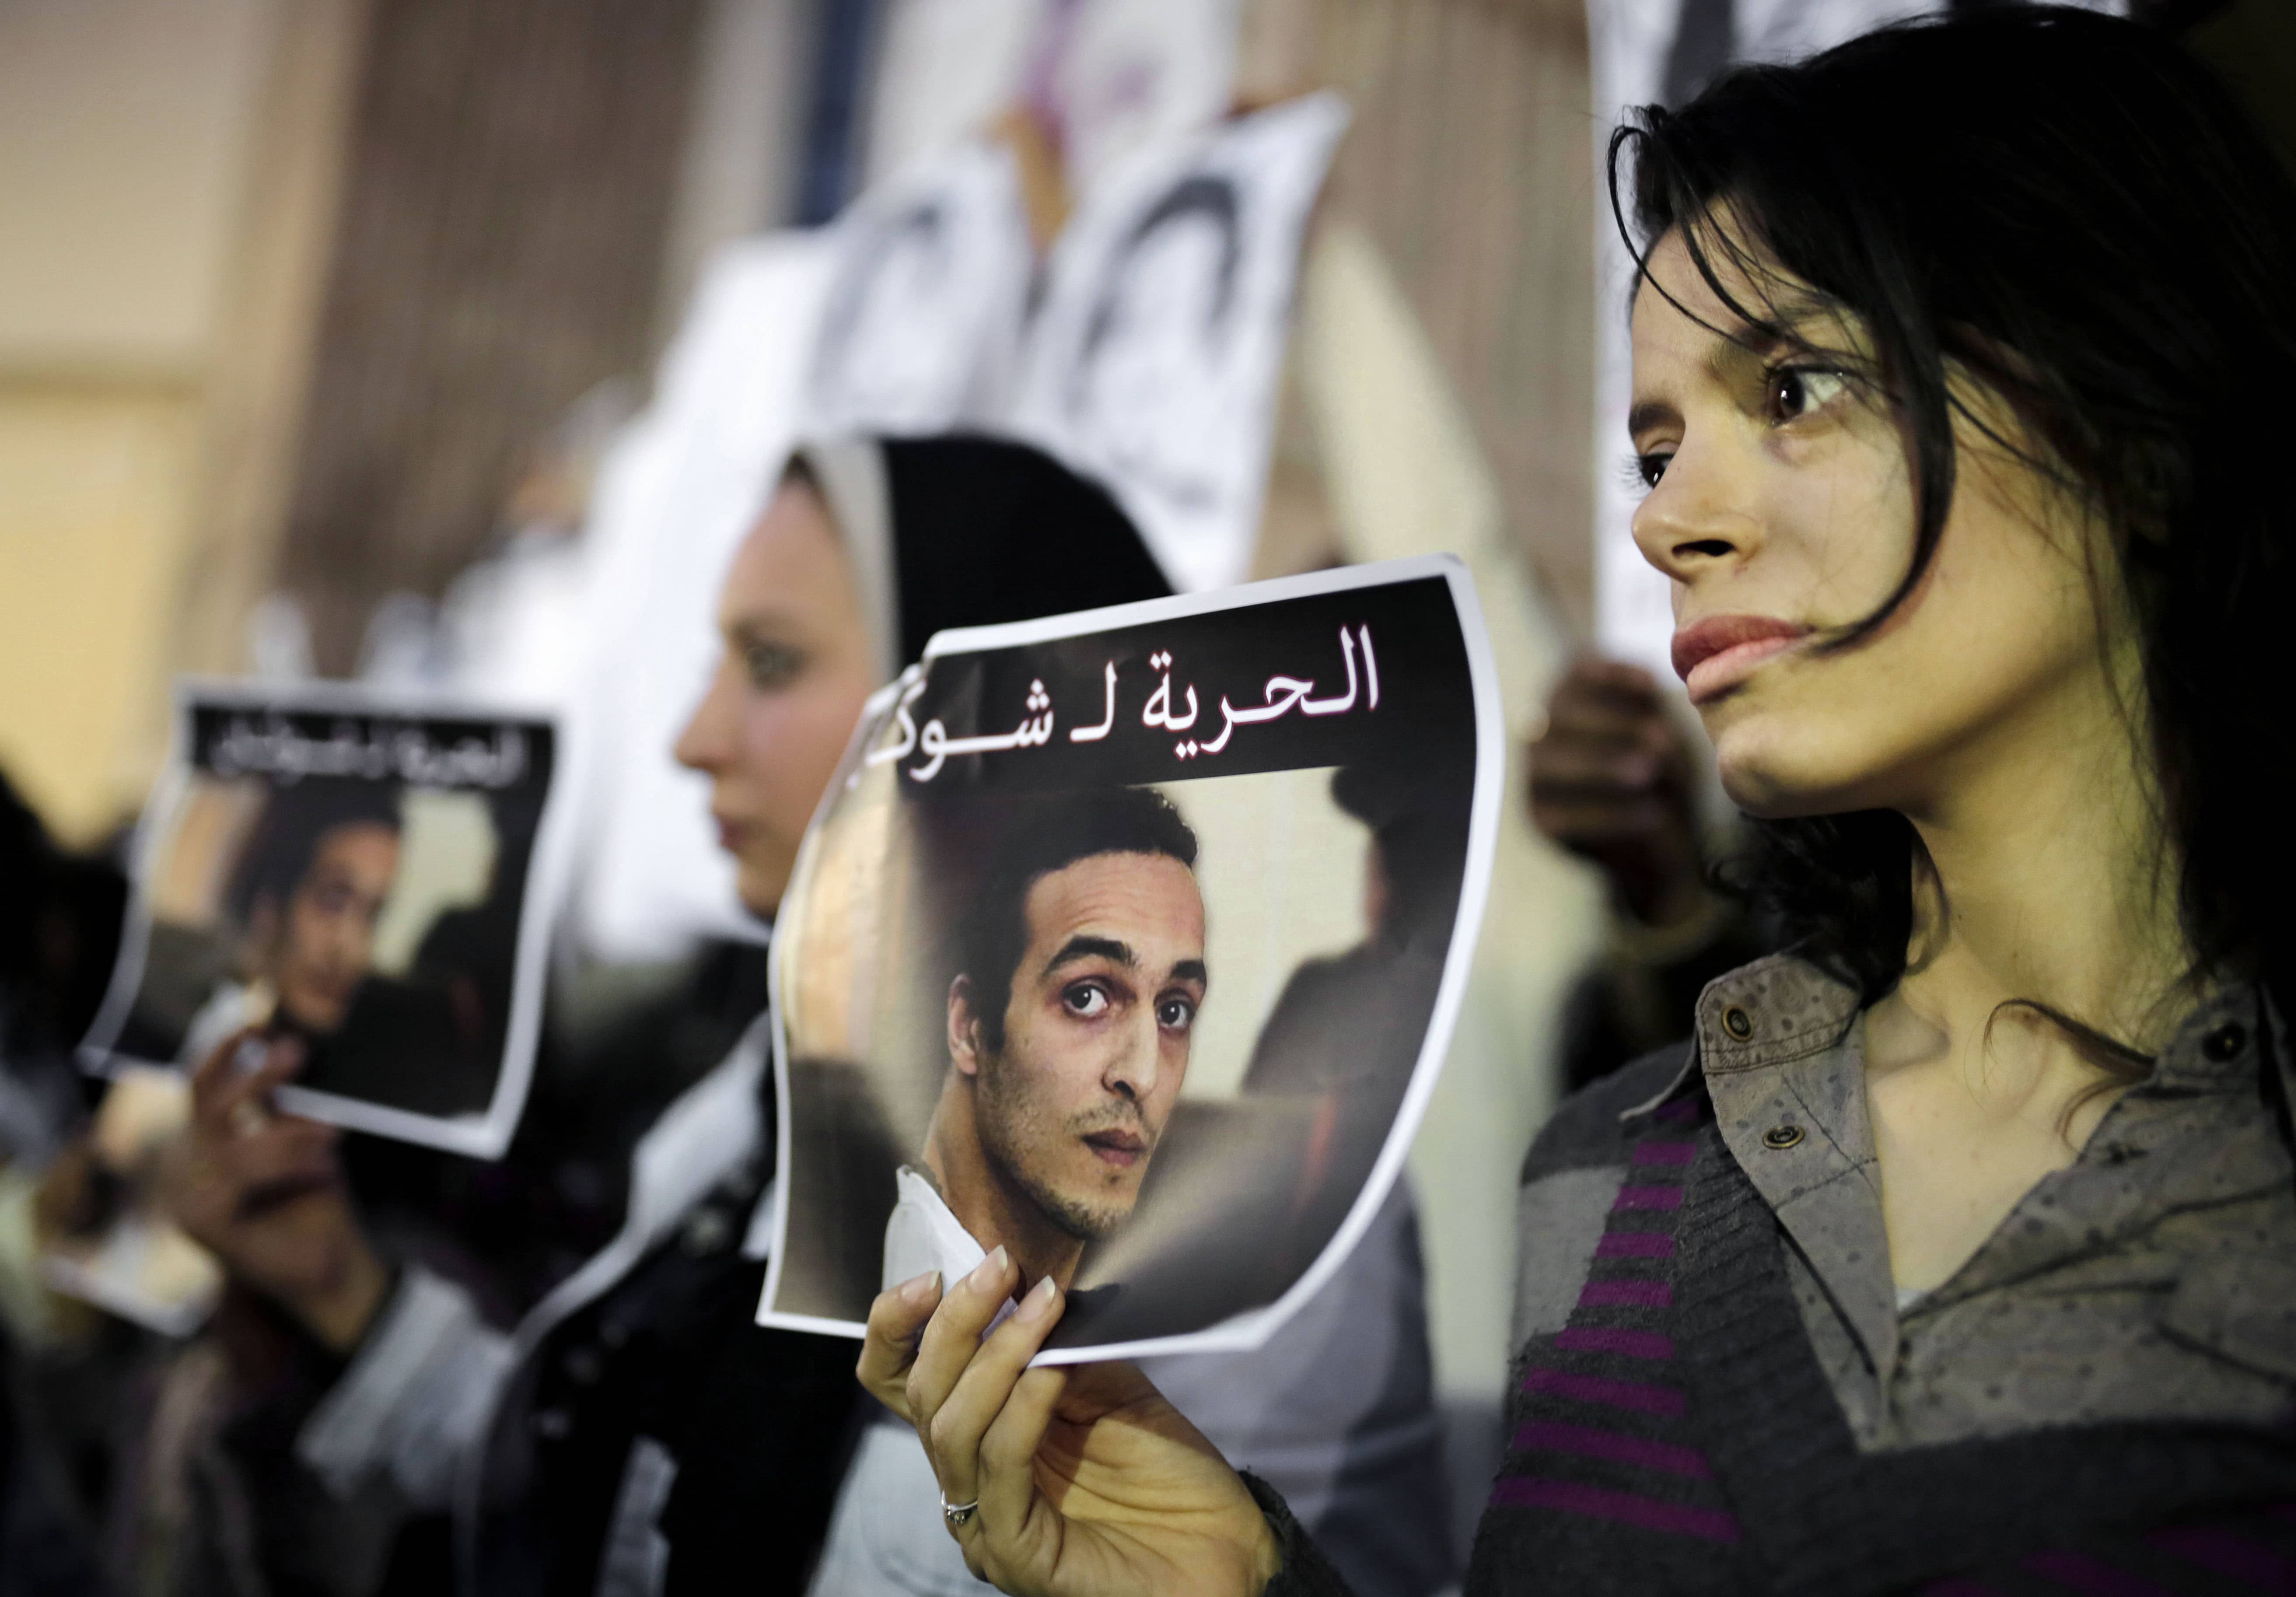 Egyptian journalists hold posters calling for the release from prison detention of Mahmoud Abou-Zeid, known as Shawkan, in front of the Syndicate of Journalists building in Cairo, Egypt, 9 December 2015, AP Photo/Amr Nabil